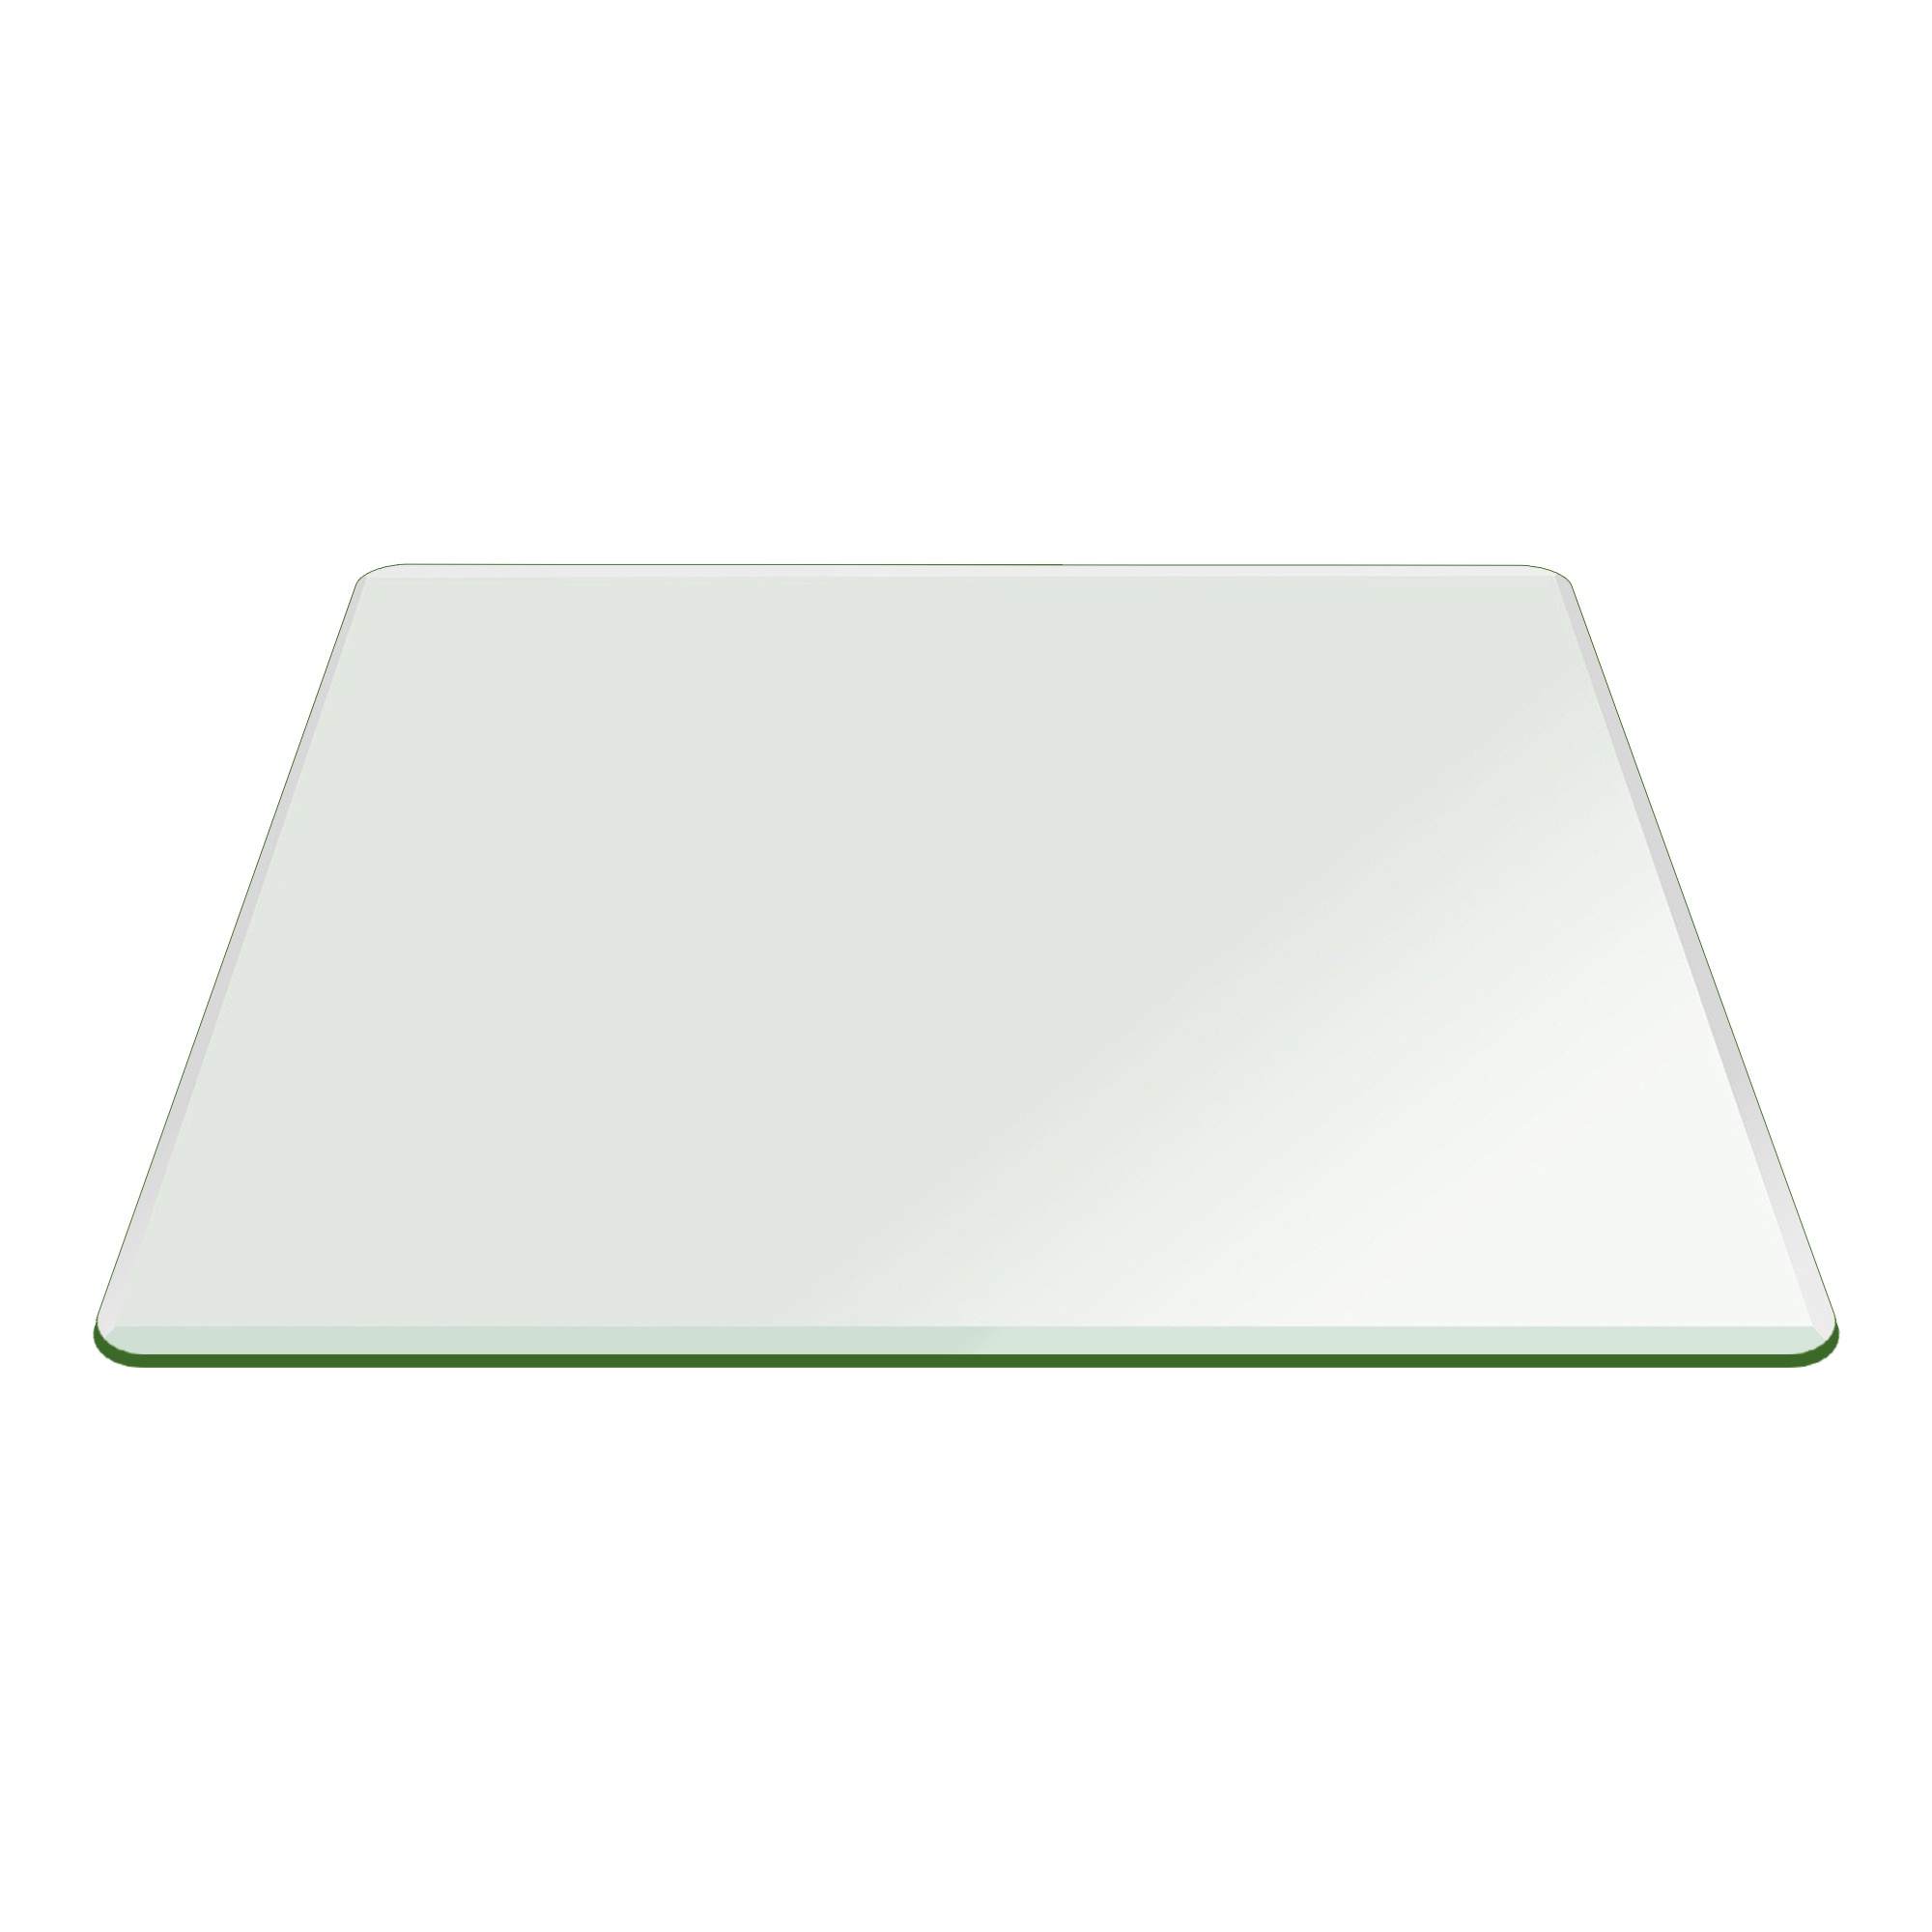 18 Inch Square Glass Bevel Polish, 18 Round Glass Table Top Replacement